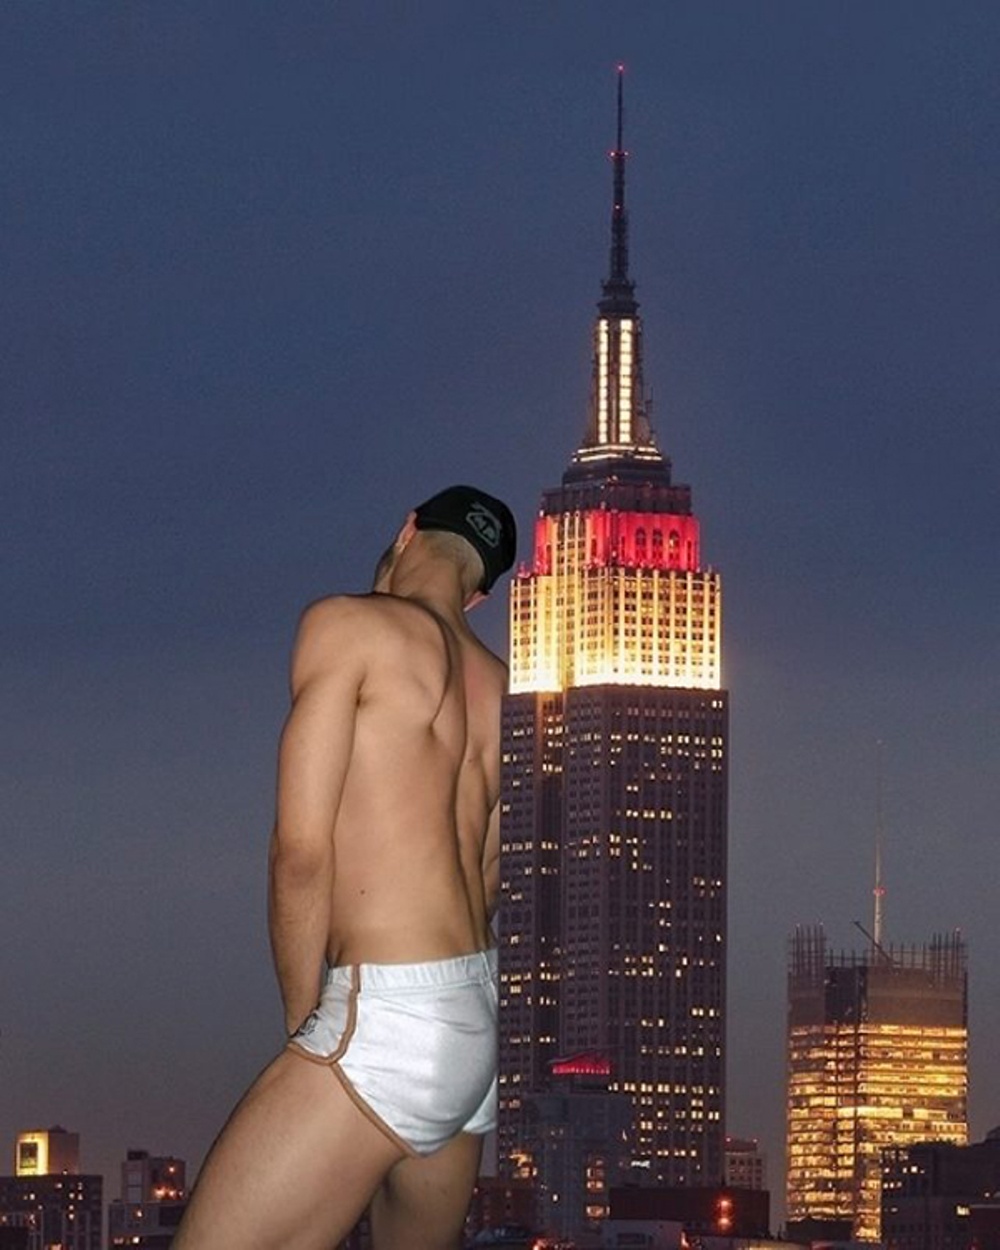 From the 'NYC Go Go (Postcard from the Edge)' series (2014) / Robert Getso. Courtesy of Timothy Landers. Exhibited in 'Cruising Pavilion: Architecture, Gay Sex and Cruising Culture' in Boxen at ArkDes.